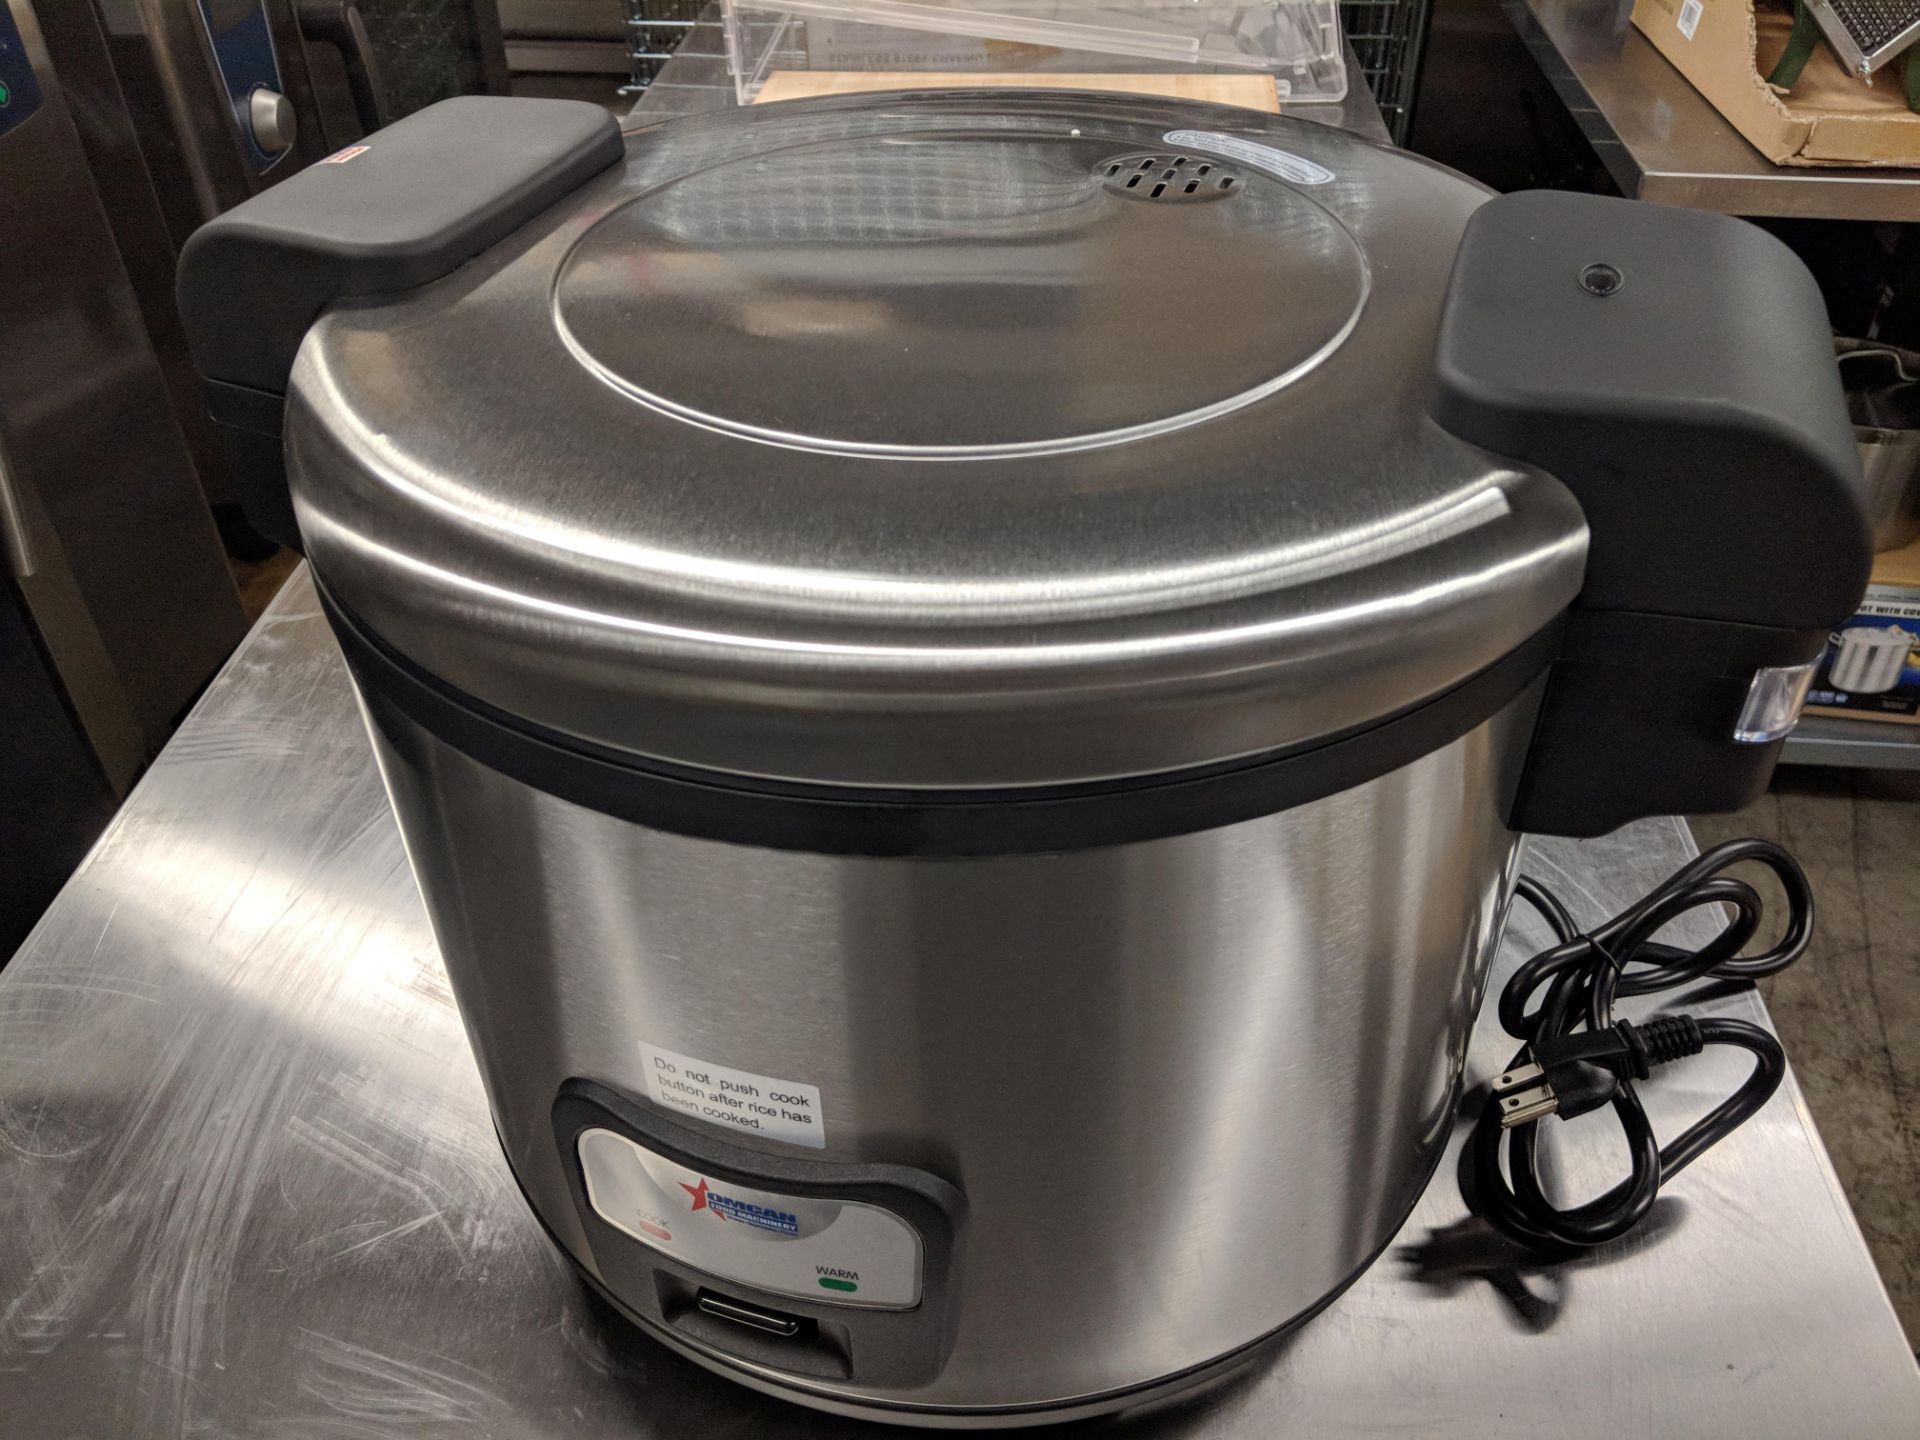 60 Cup Rice Cooker/Warmer